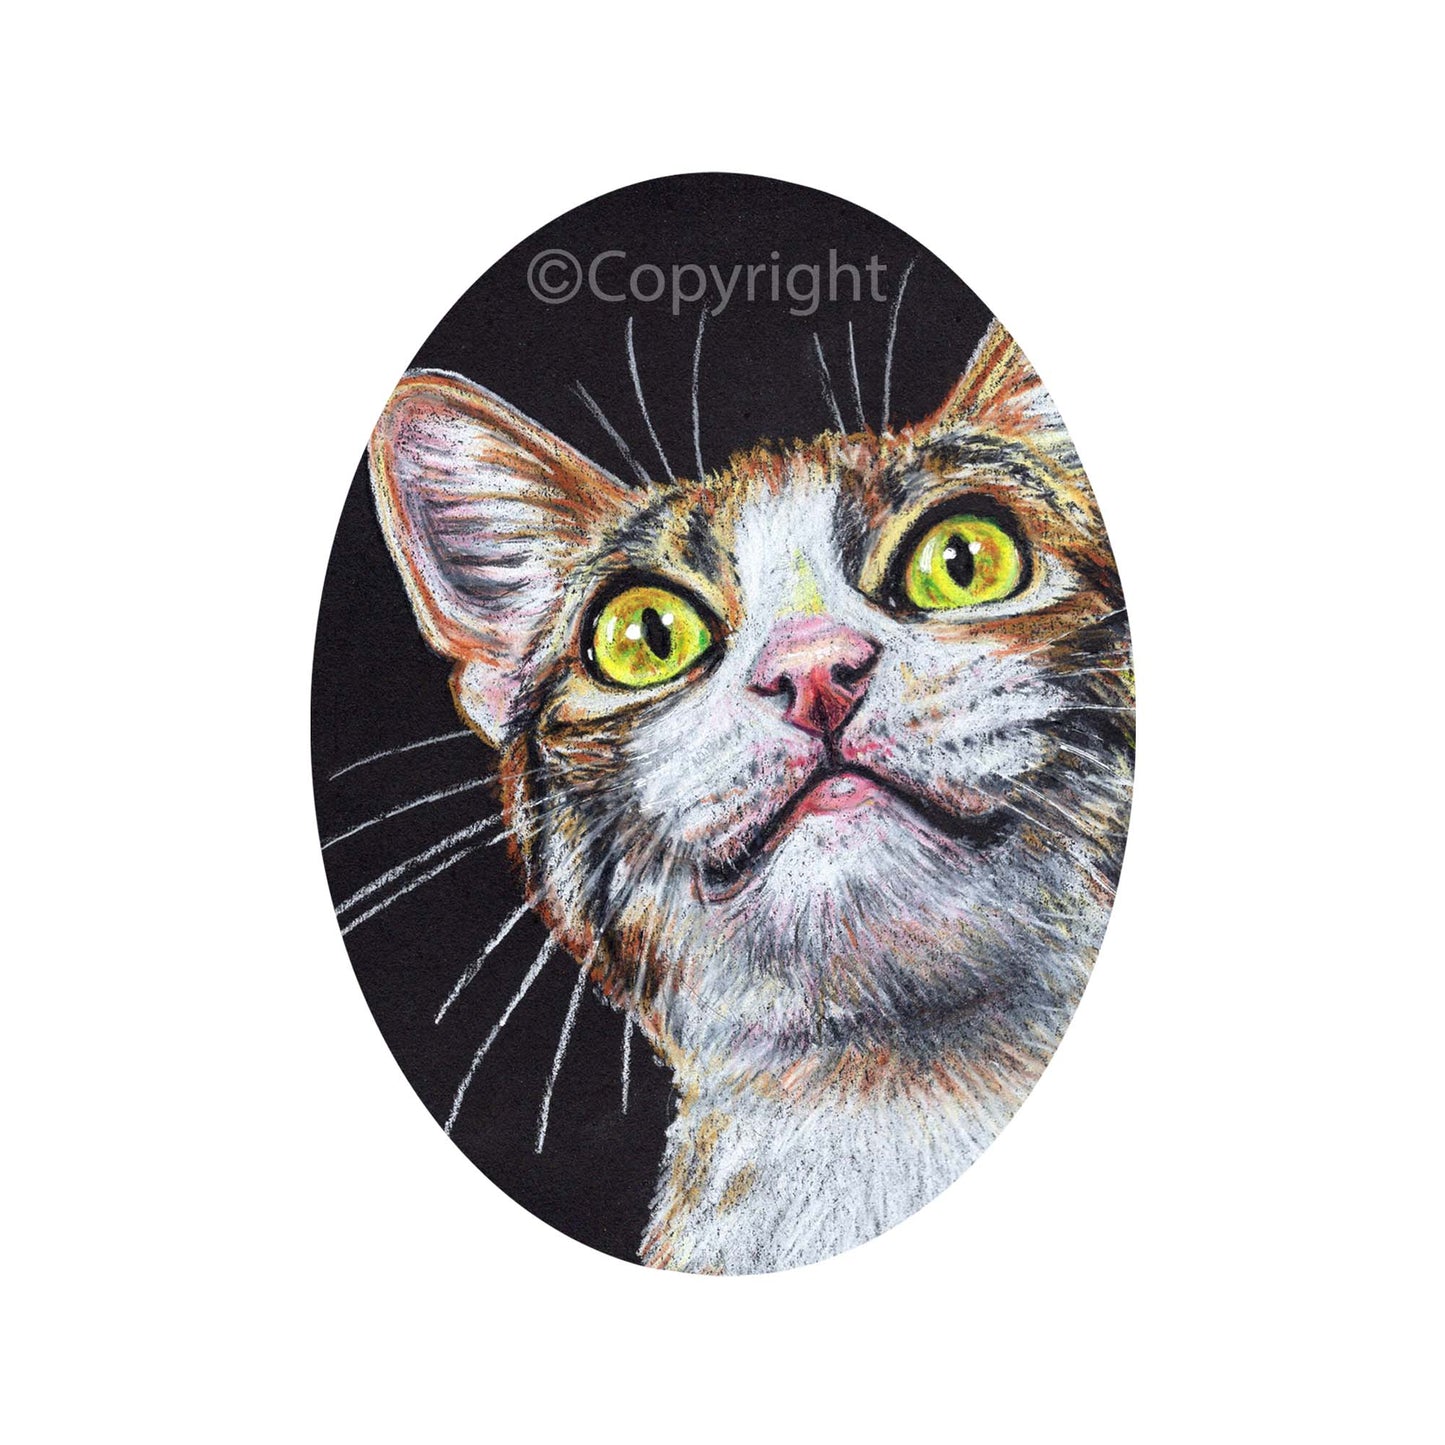 Crayon drawing of a calico cat looking up. Formated as an oval with a black background